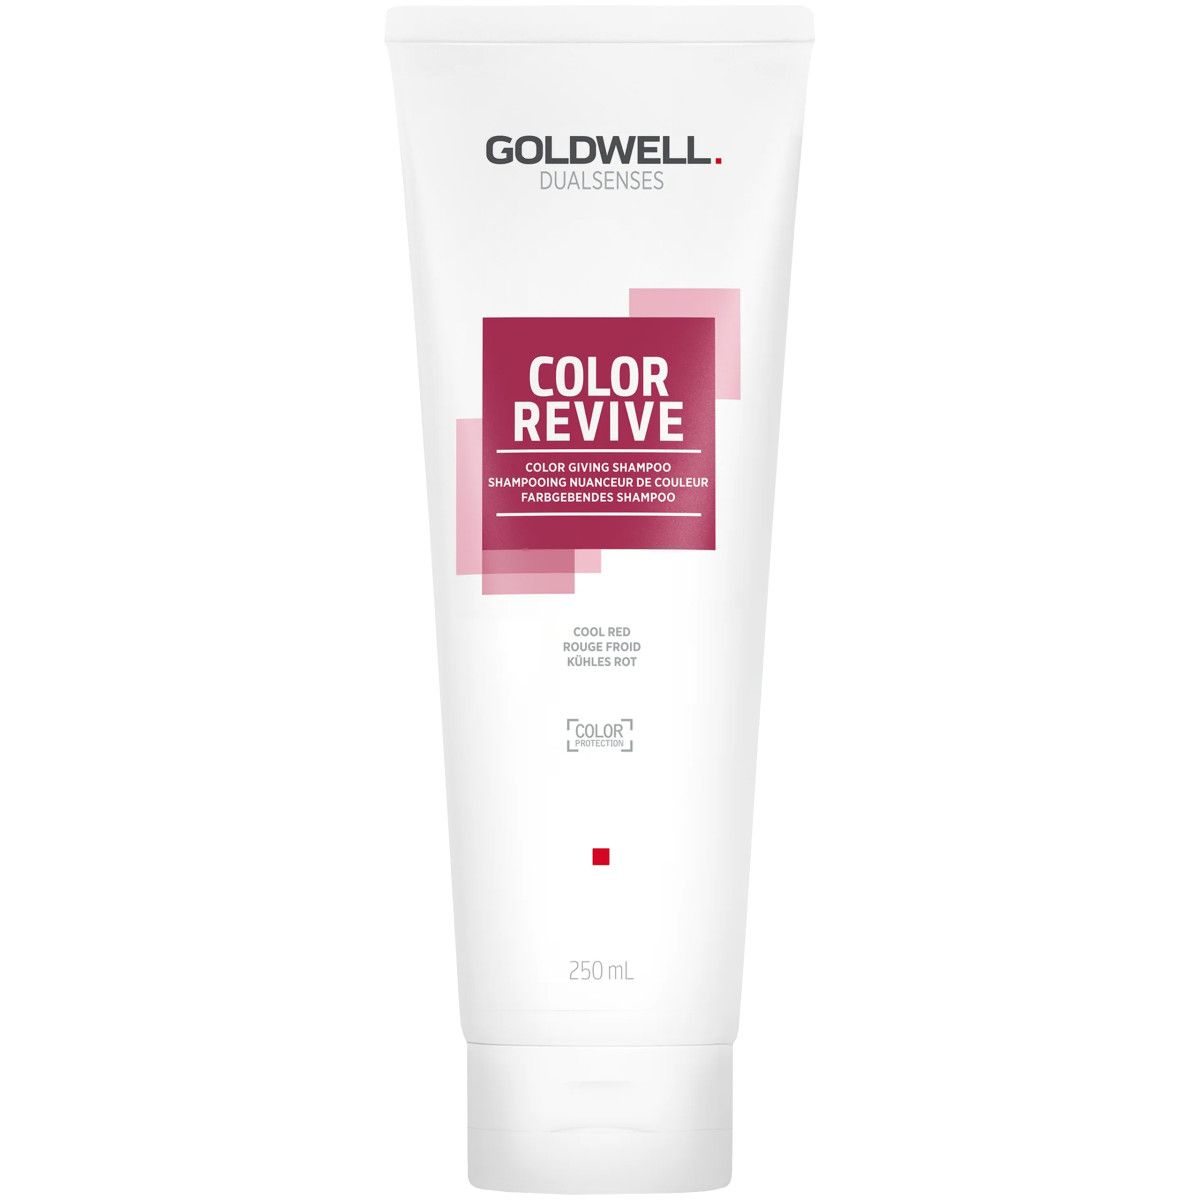 goldwell szampon color opinie